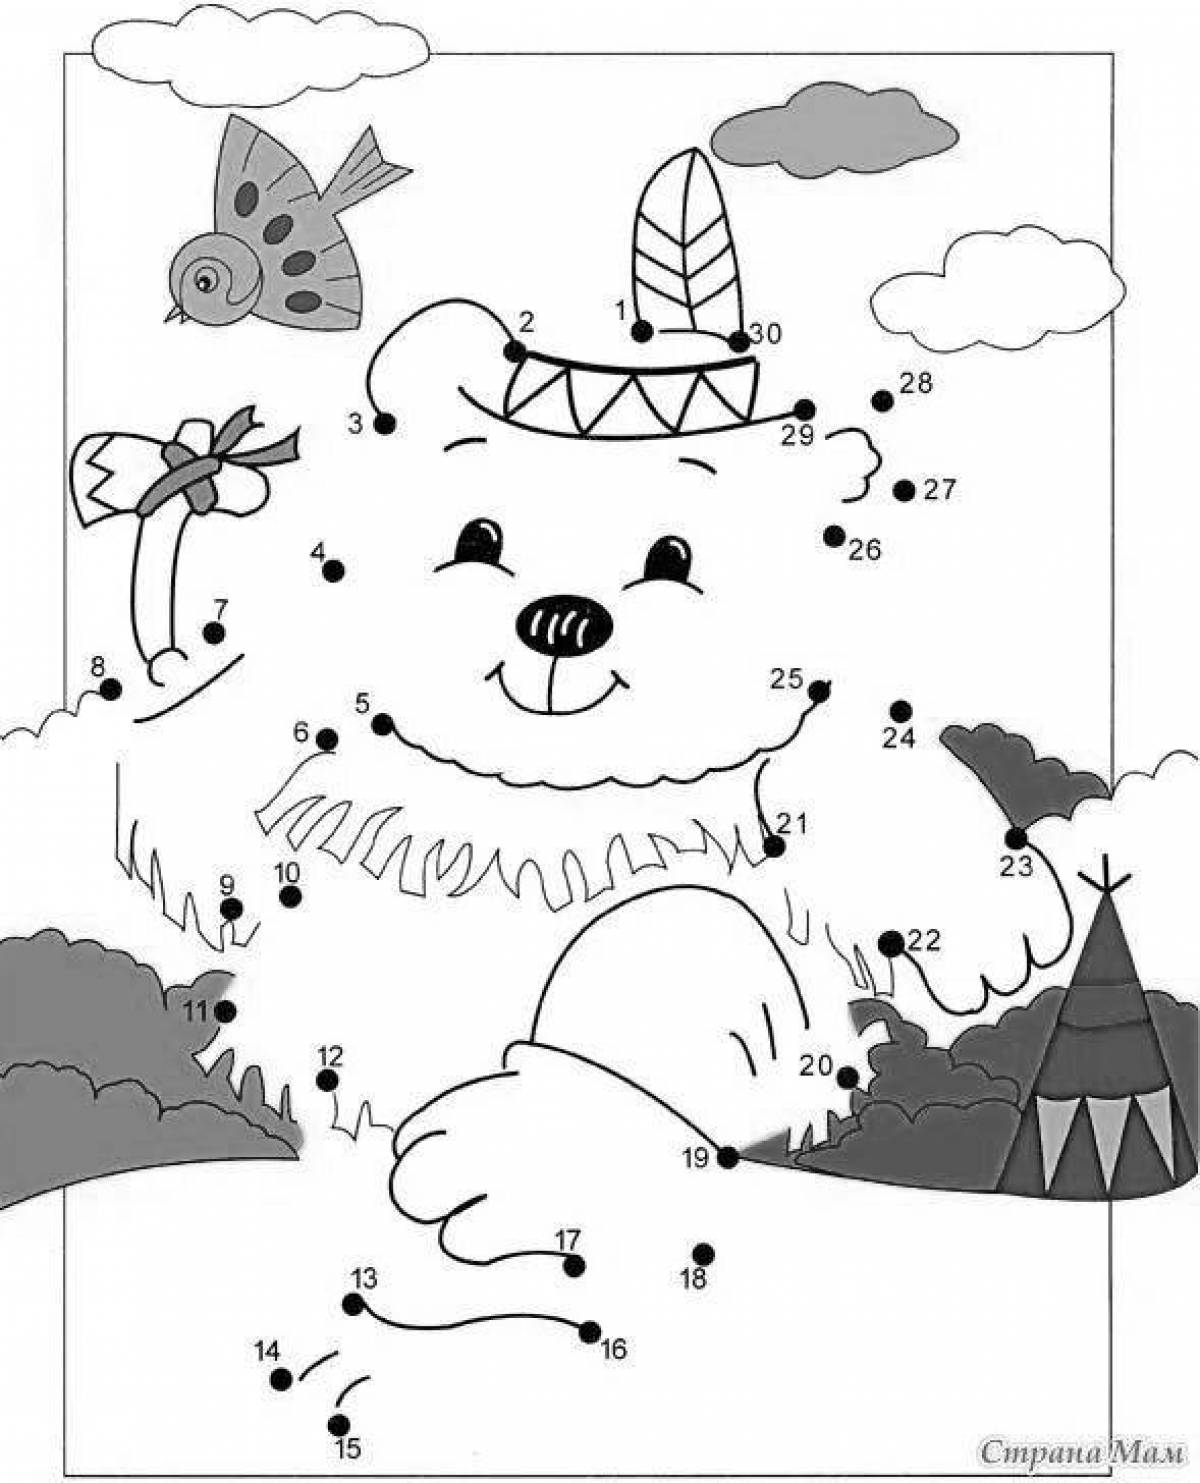 Fun coloring by scattered dots